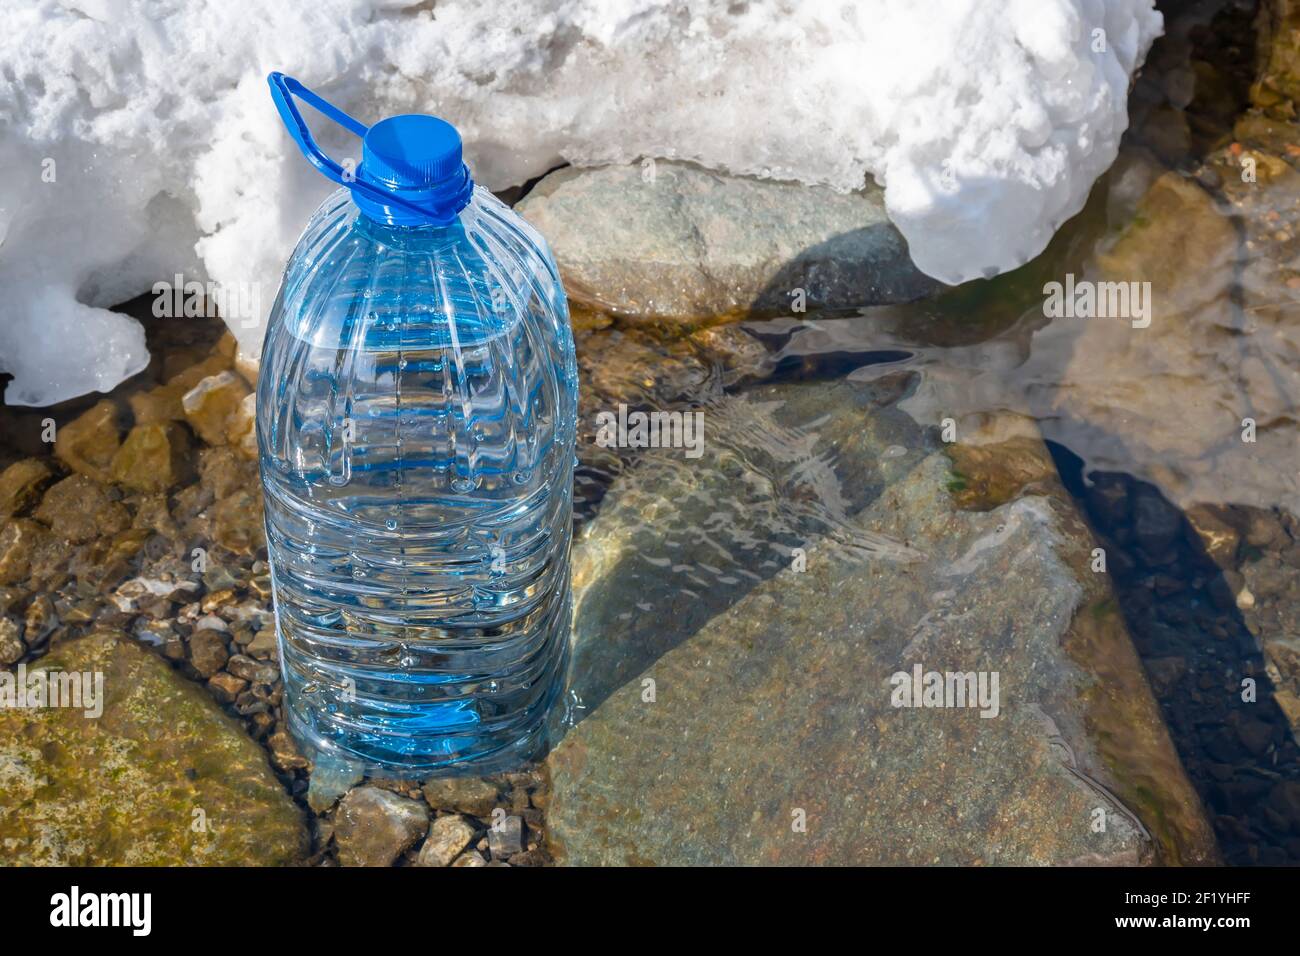 five liter plastic bottle filled with pure life-giving fresh water stands on the stone bottom of a spring, river, near the melting snow in the spring Stock Photo